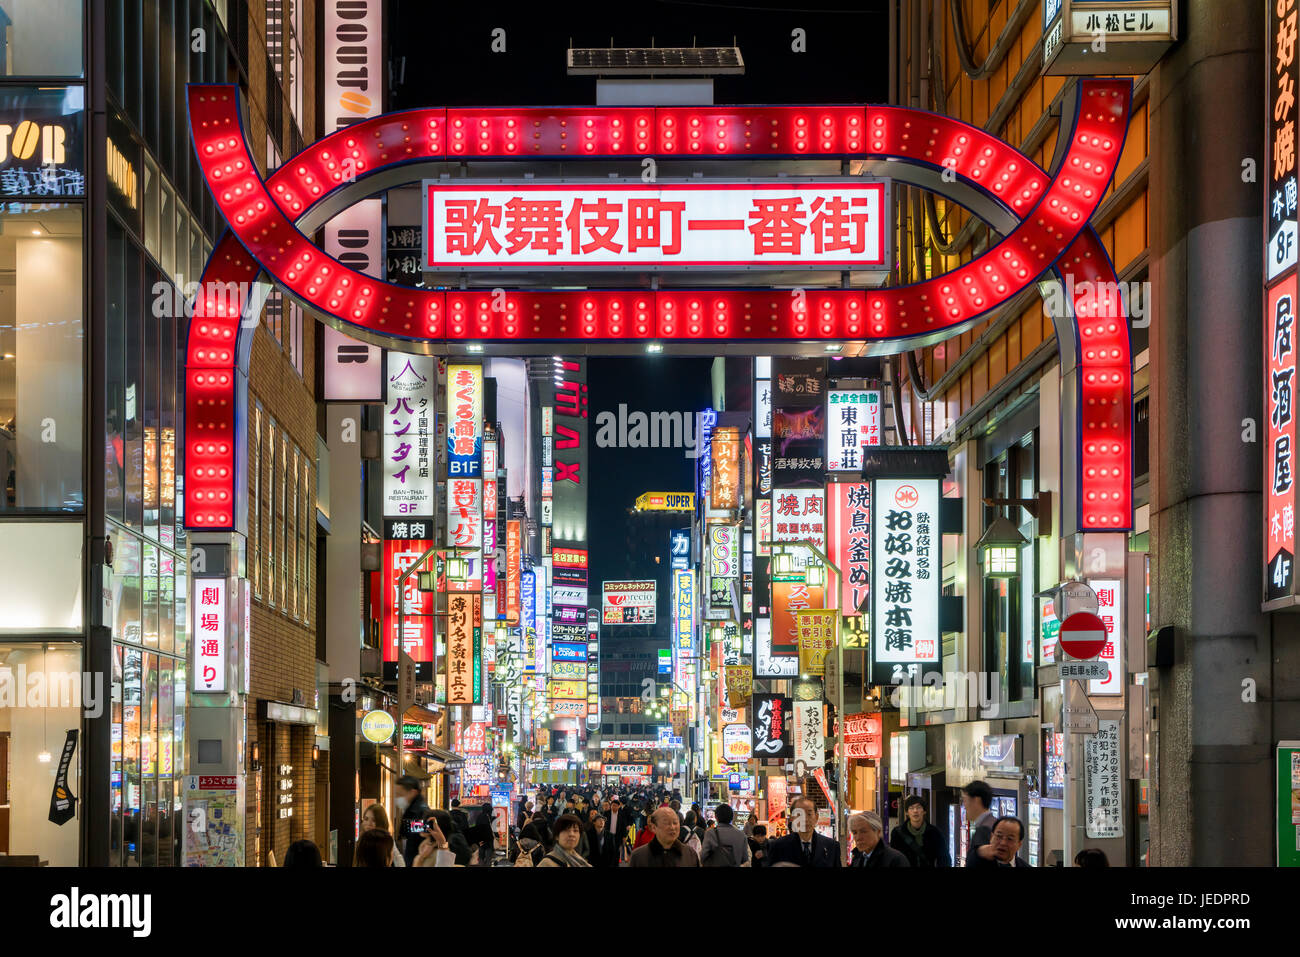 Tokyo, Japan - APRIL 3, 2017 : Nightlife in Shinjuku. Shinjuku is one of Tokyo's business districts with many international corporate headquarters loc Stock Photo